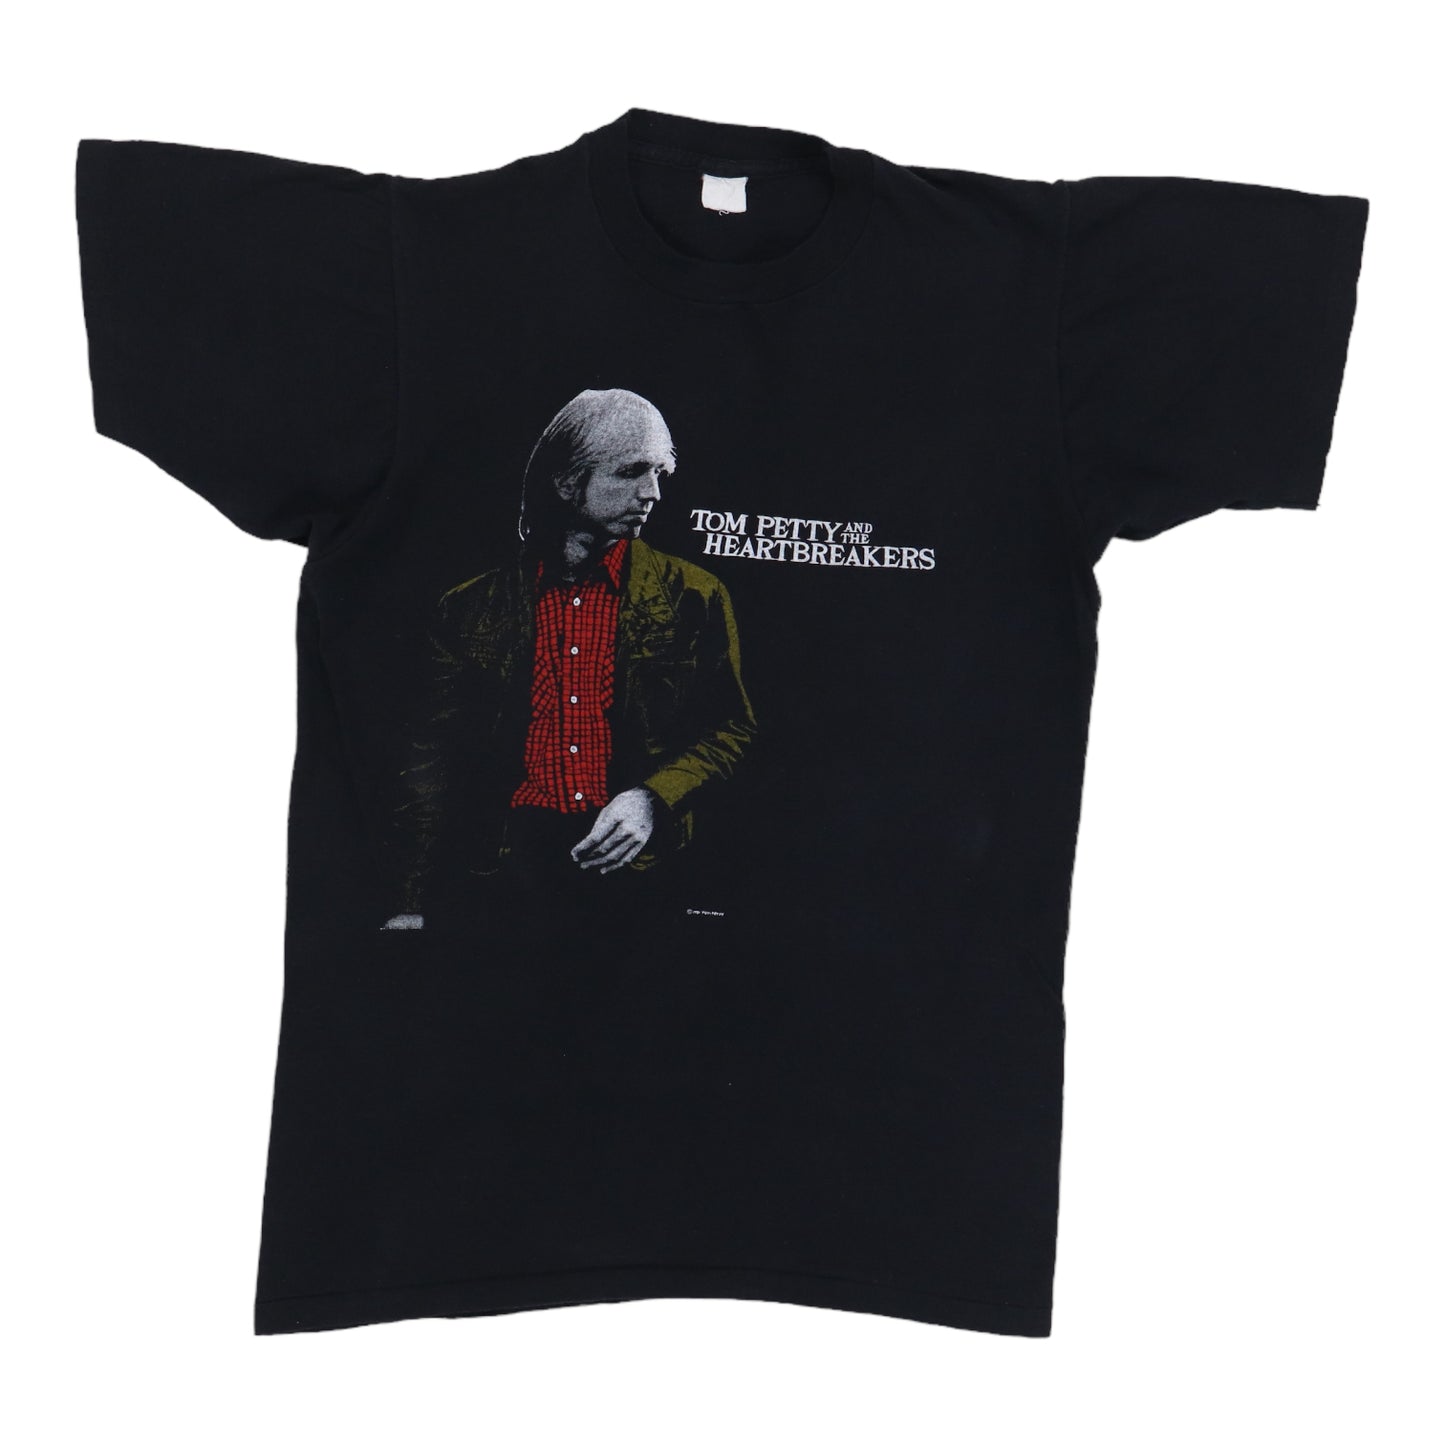 1981 Tom Petty And The Heartbreakers Tour Shirt